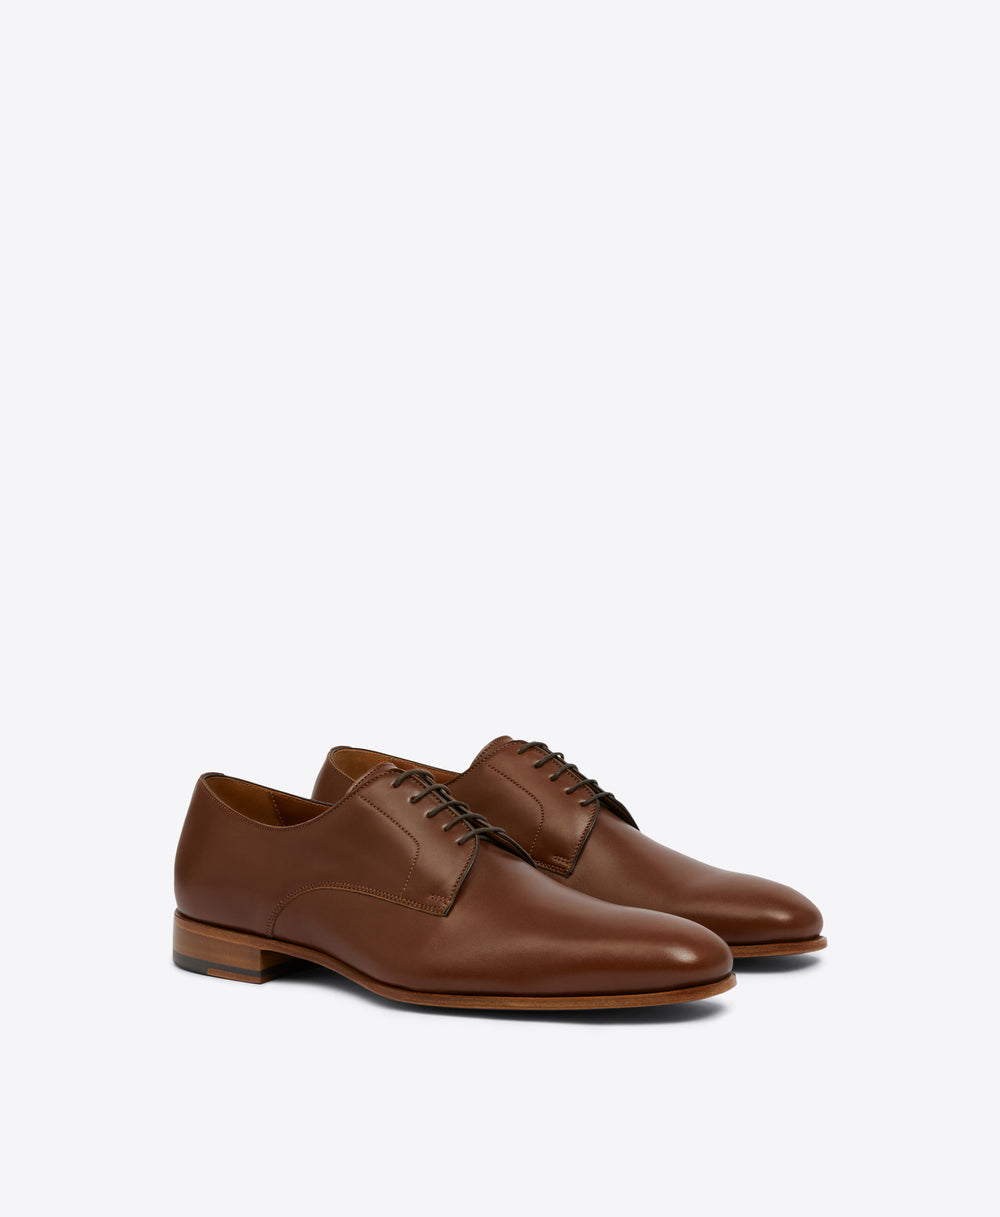 Men's Brown Leather Derby Shoes Malone Souliers